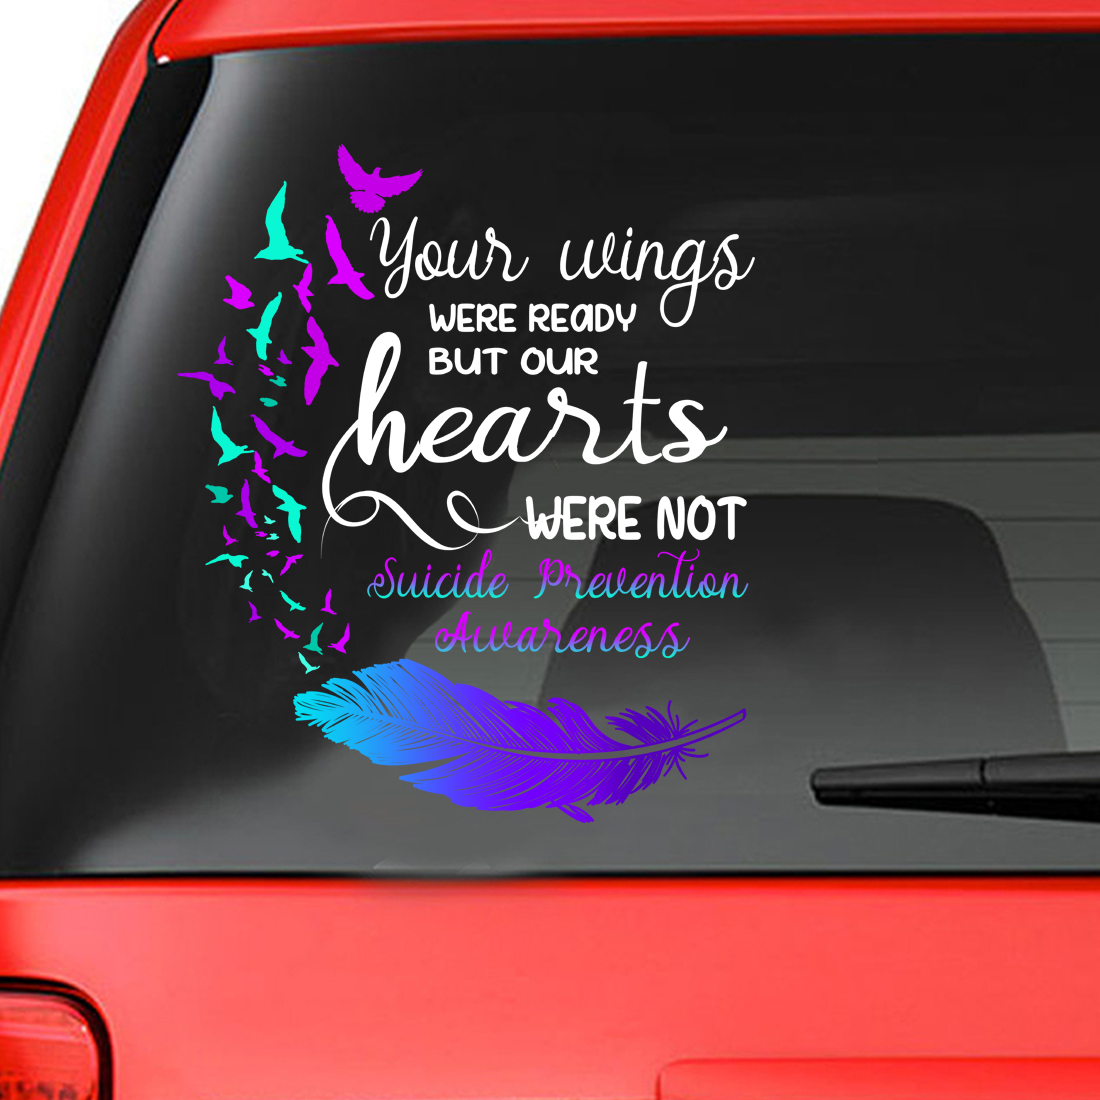 Suicide Prevention Awareness Sticker : Your Wings